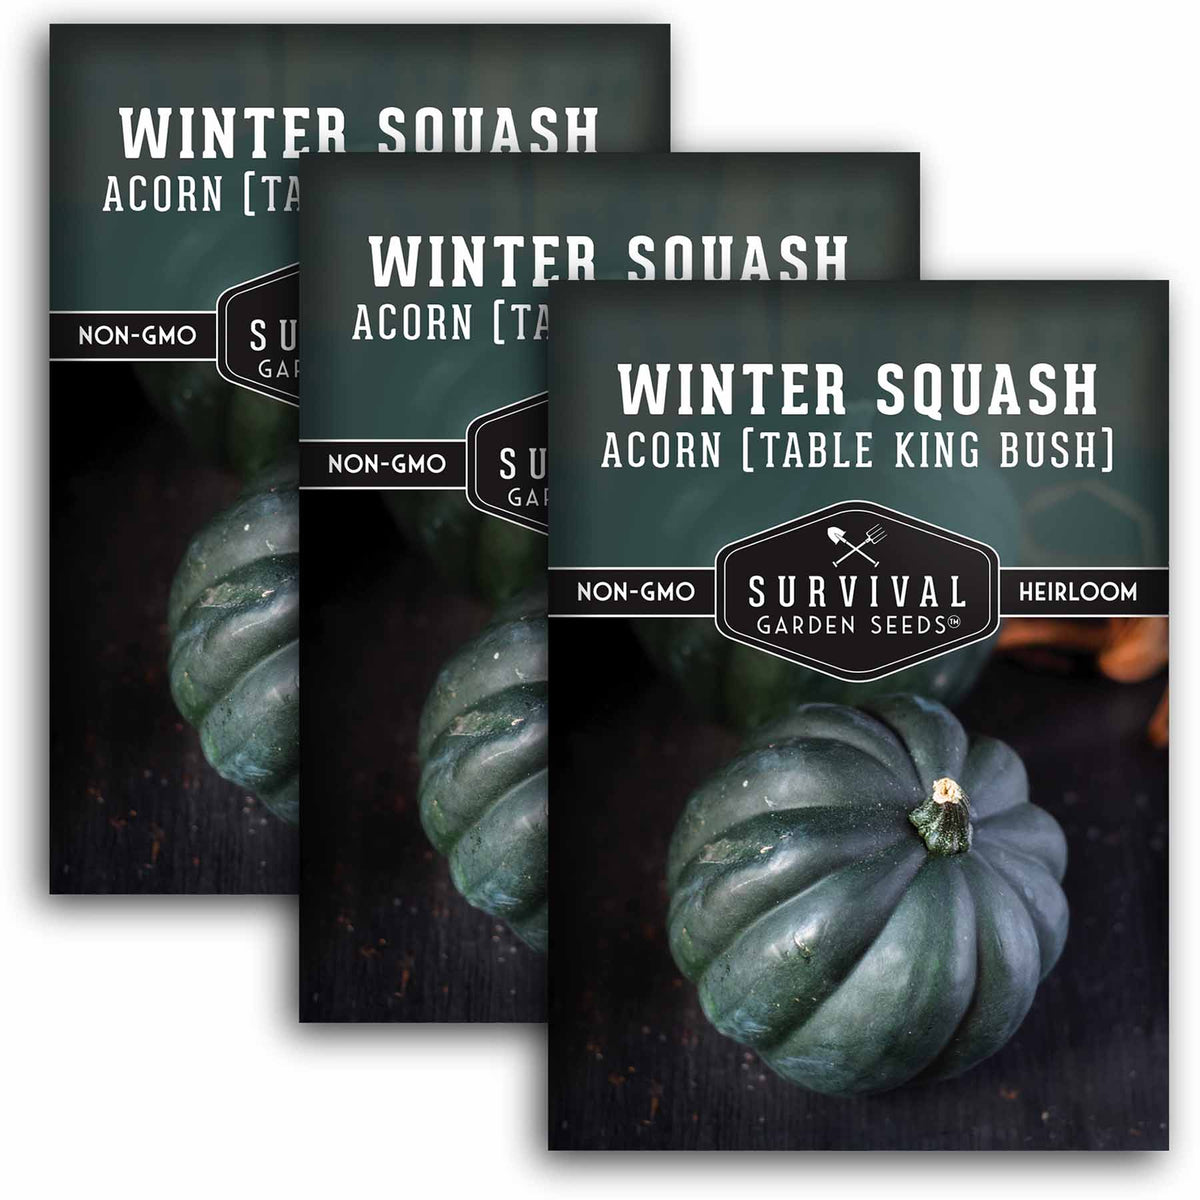 3 packets of Acorn Squash seeds